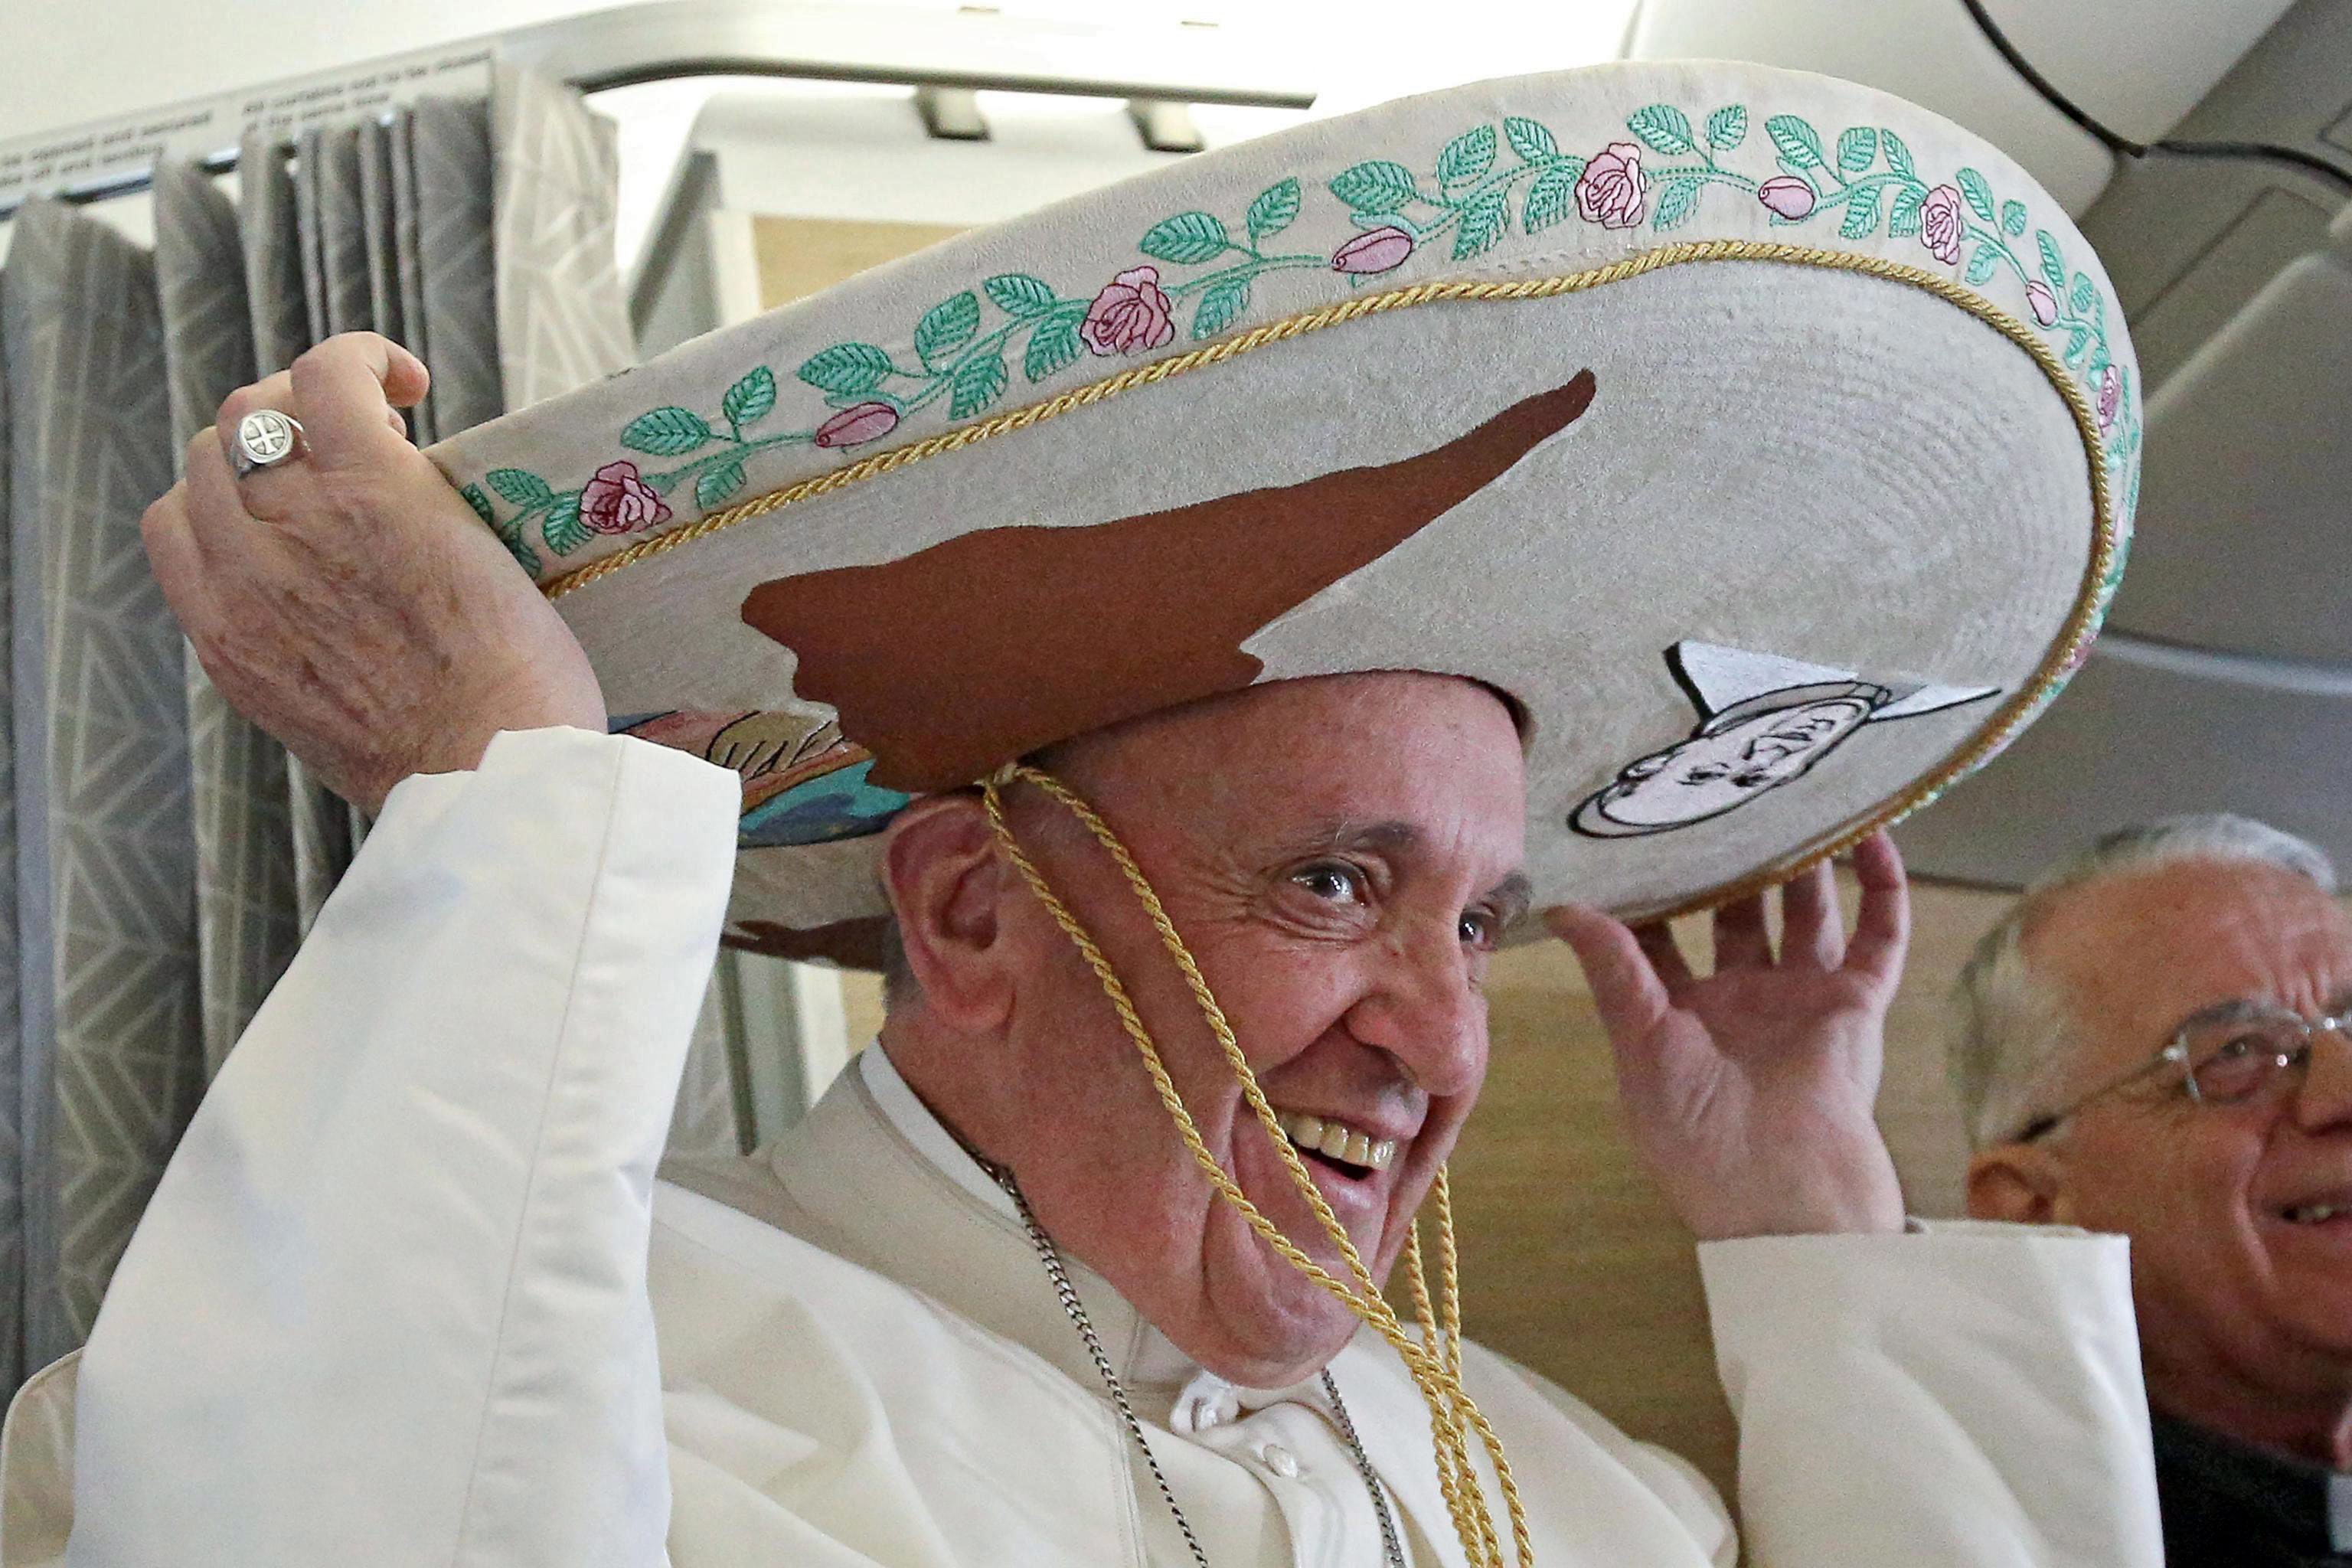 epa05155979 Pope Francis wears a sombrero hat he received as a gift by a Mexican journalist aboard of the airplane to Havana, Cuba, 12 February 2016. Pope Francis visits Cuba and Mexico from 12 to 18 February 2016. EPA/ALESSANDRO DI MEO / POOL